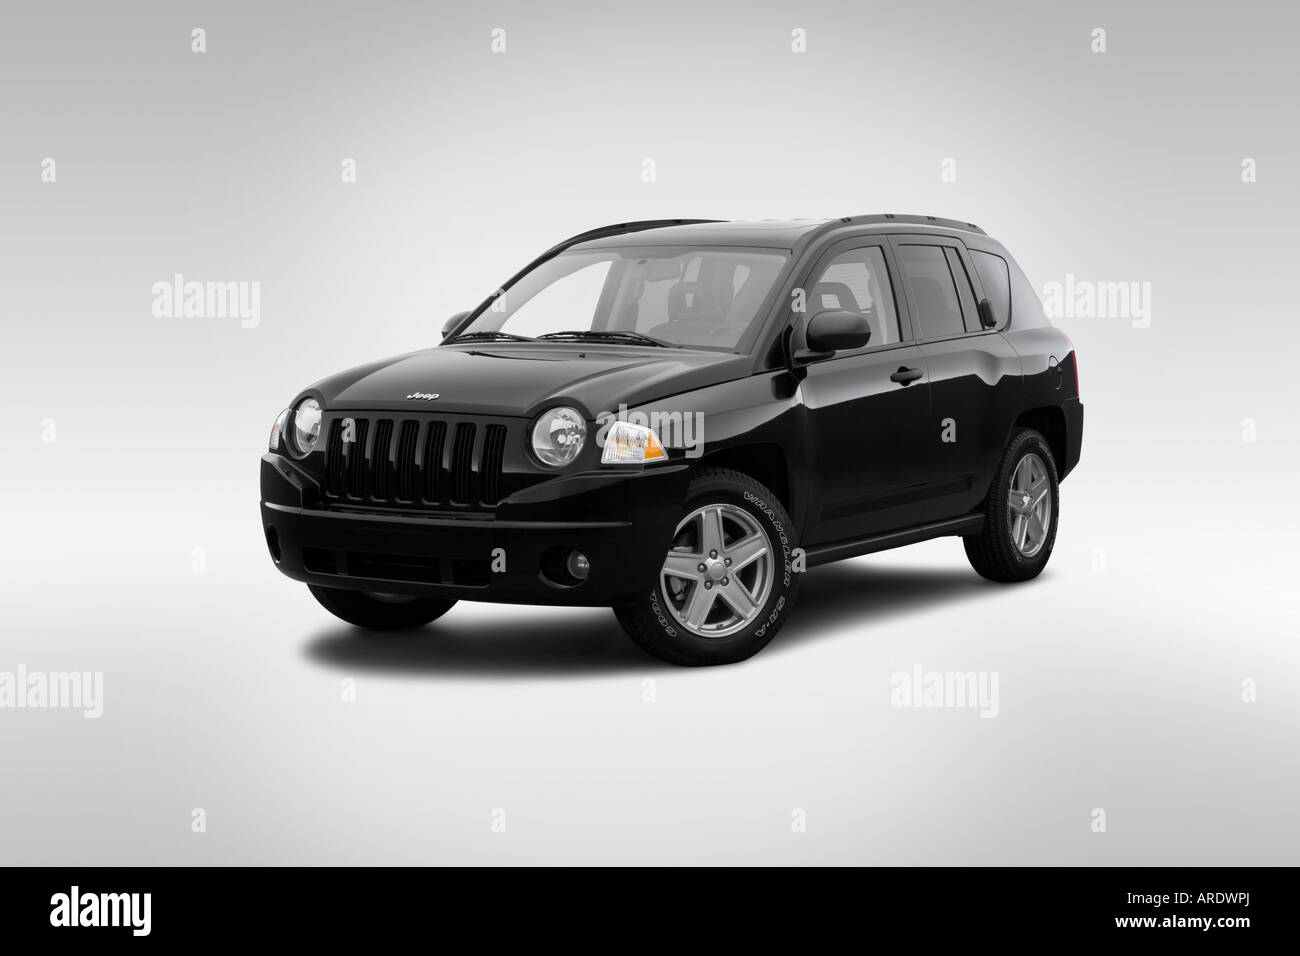 2007 Jeep Compass Sport in Black - Front angle view Stock Photo - Alamy